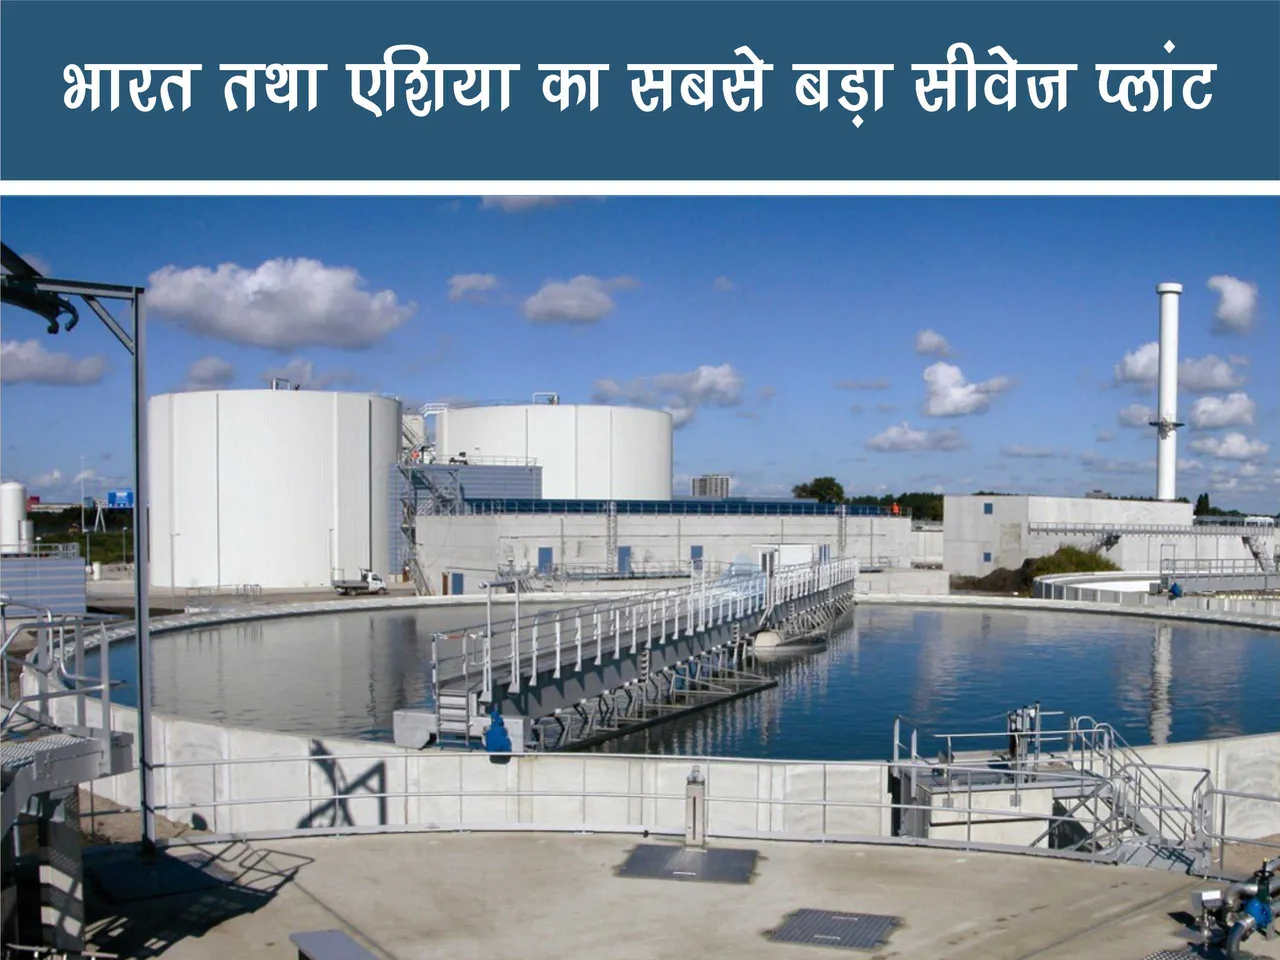 Largest sewage treatment plant in India